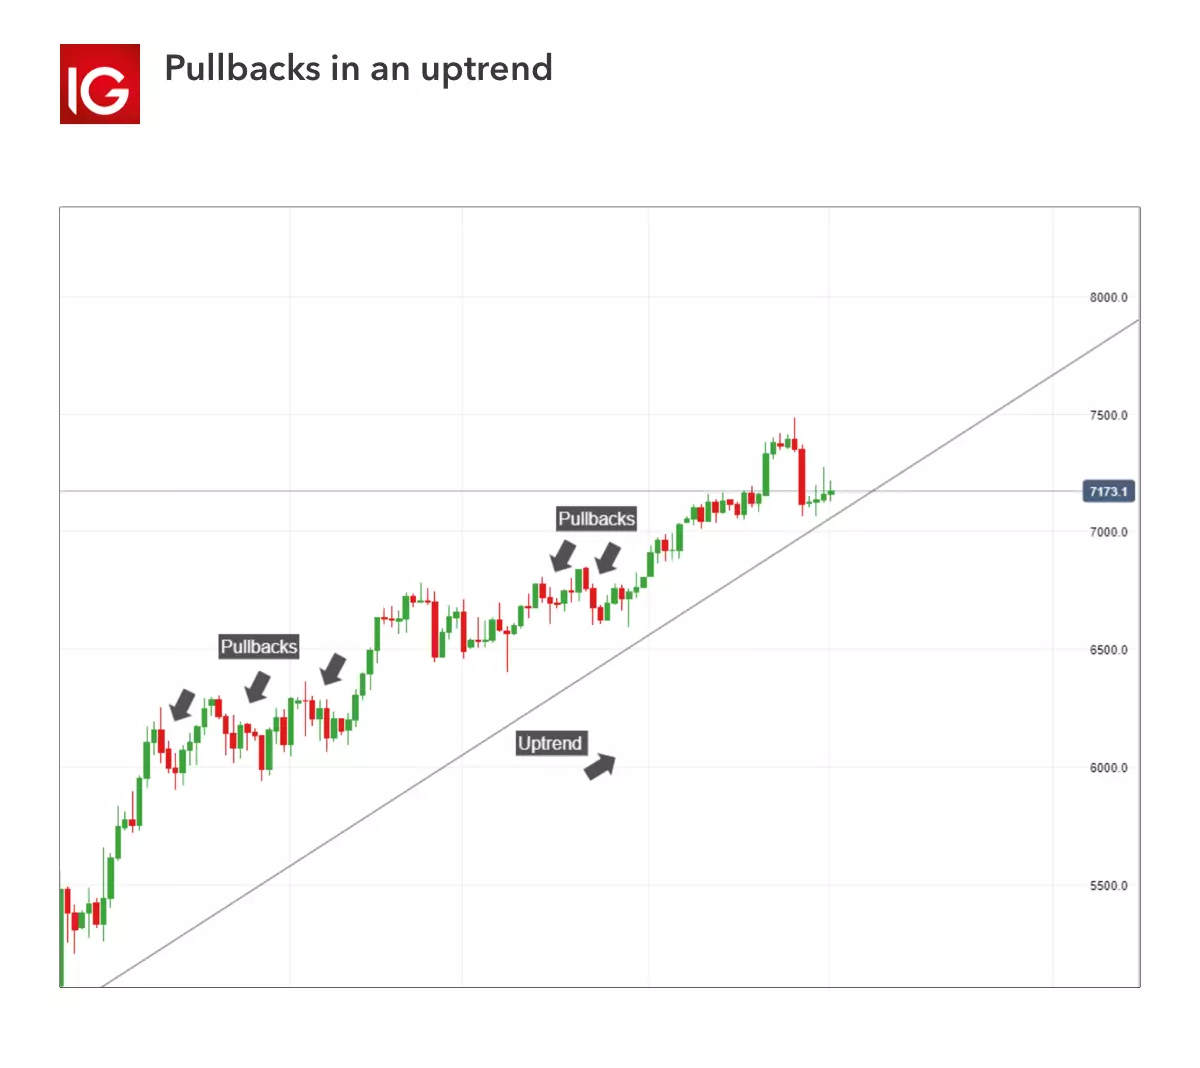 Pullbacks in an uptrend